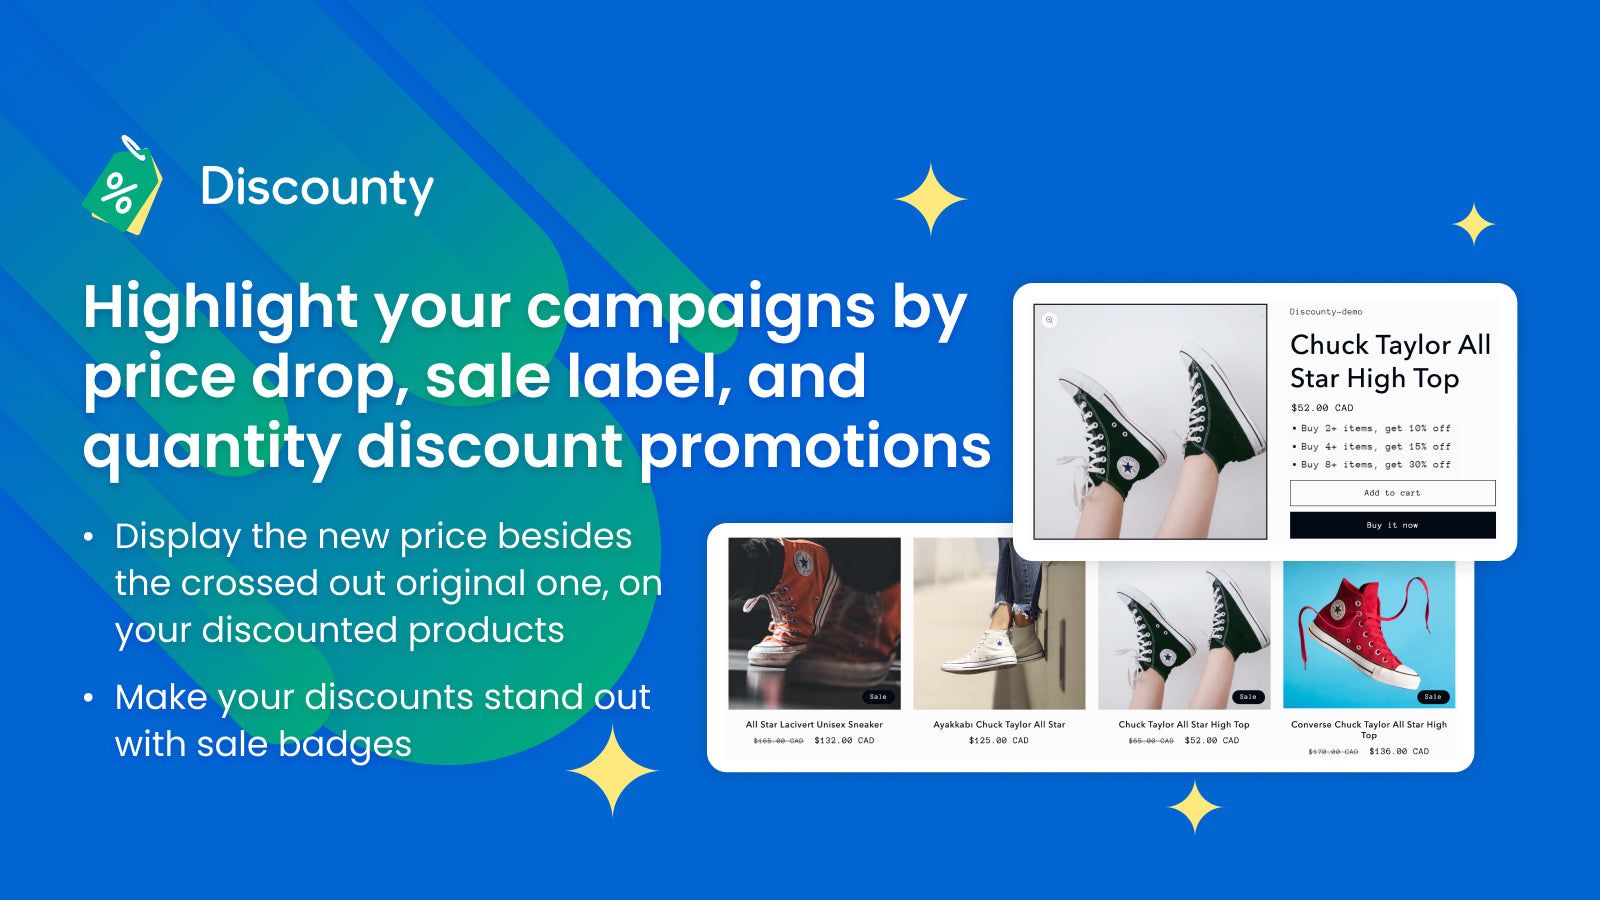 Highlight your campaigns by price drop and sale label